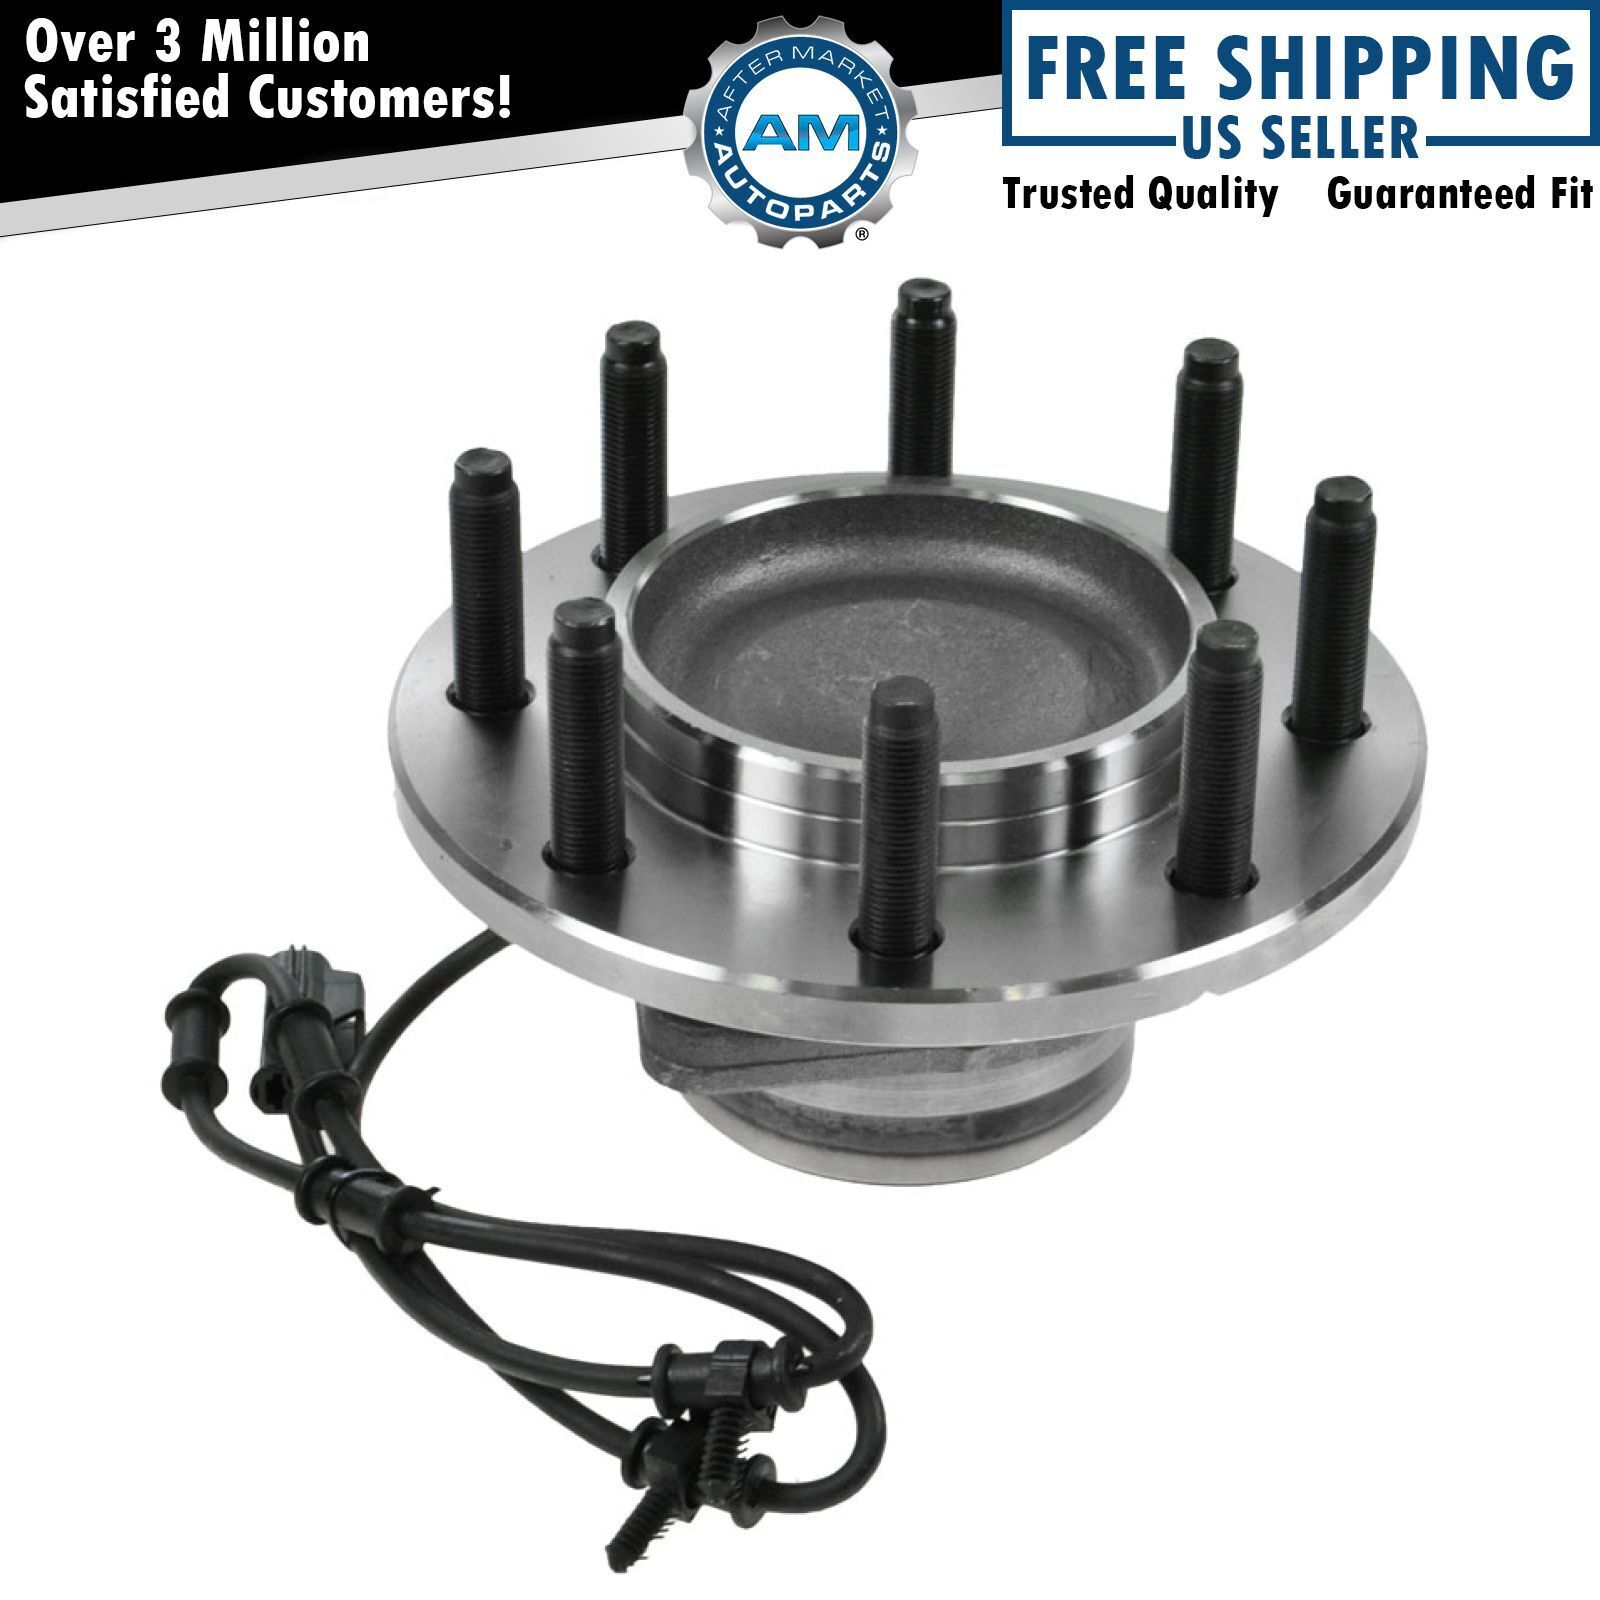 New Front Wheel Bearing Hub Assembly for Dodge Ram 2500 3500 w/ABS 2WD 8-Lug